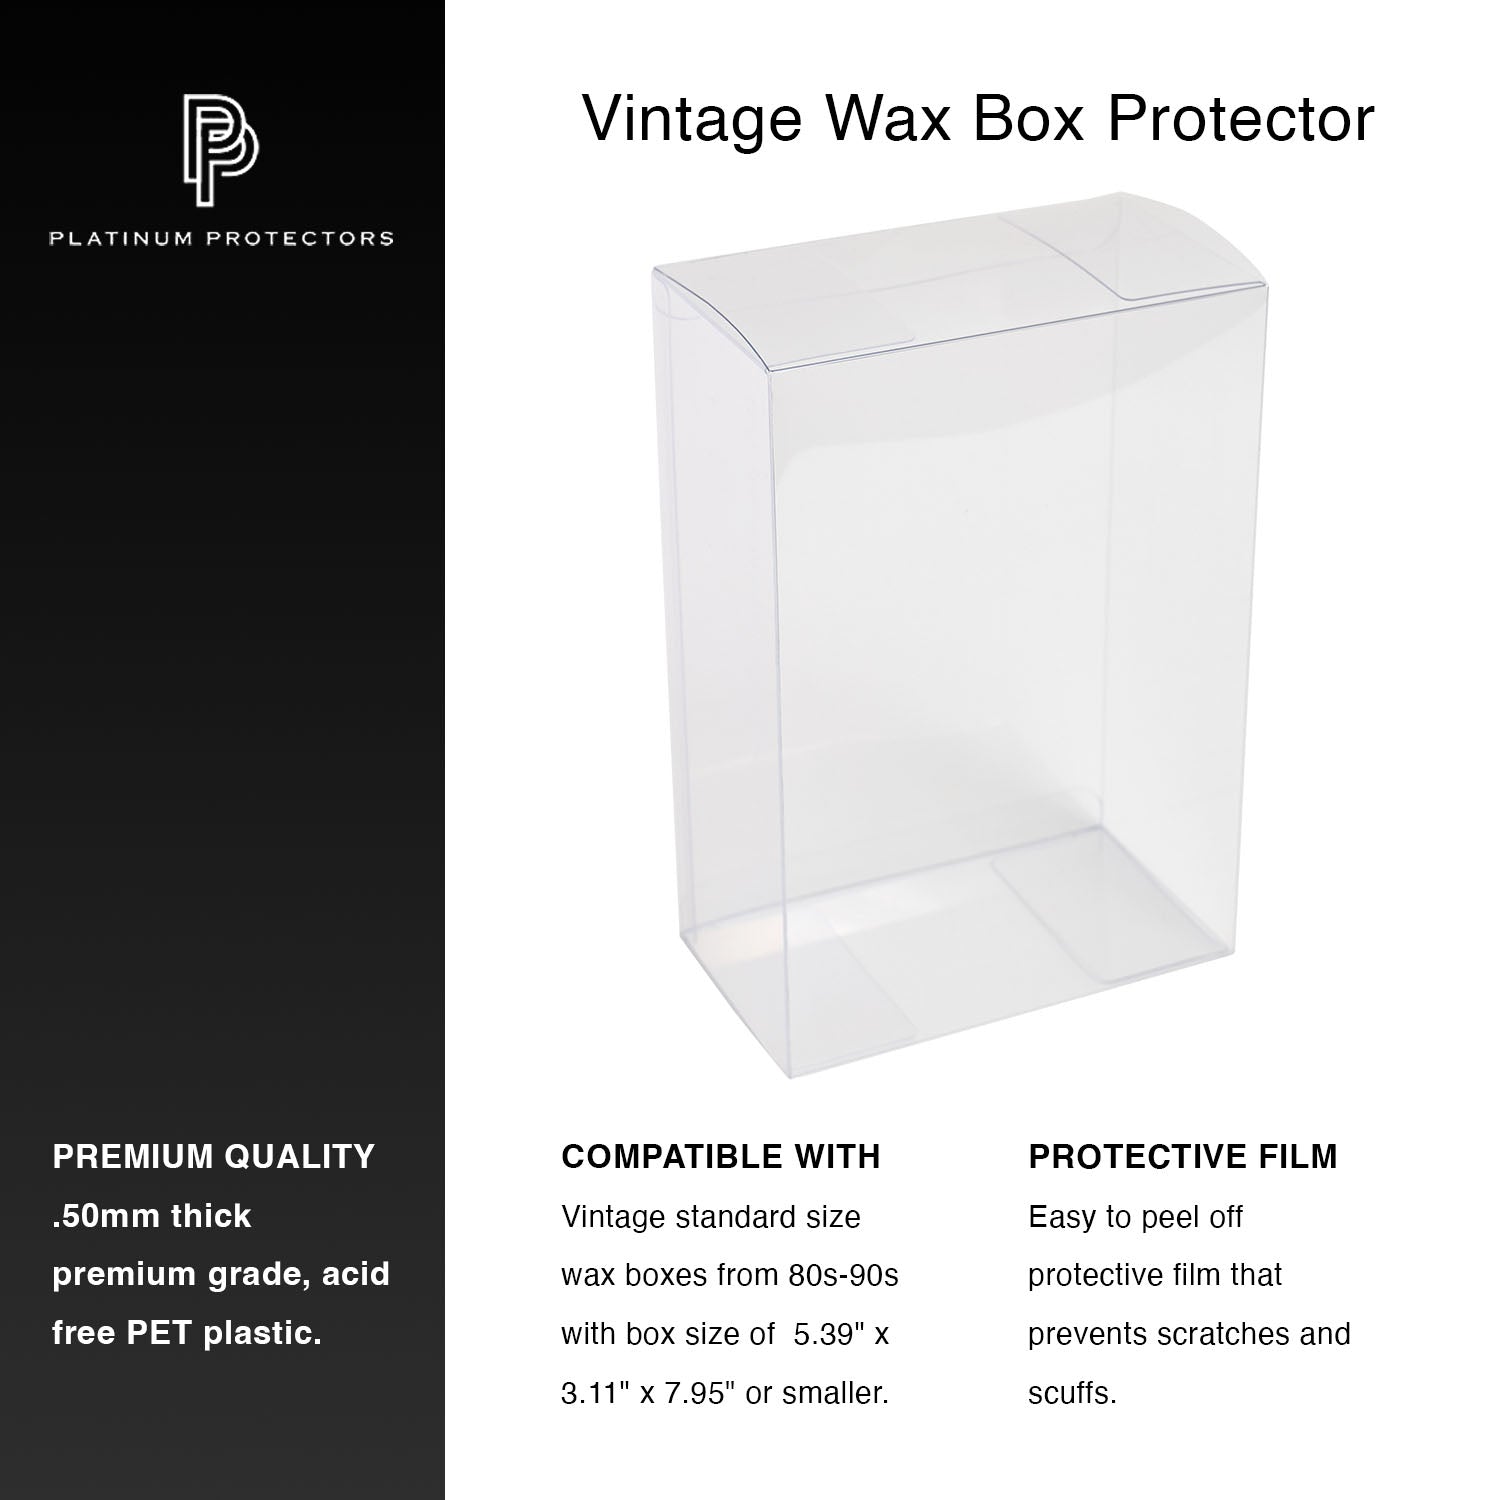 Platinum Protectors for Standard Size Vintage Wax Boxes From 80s-90s